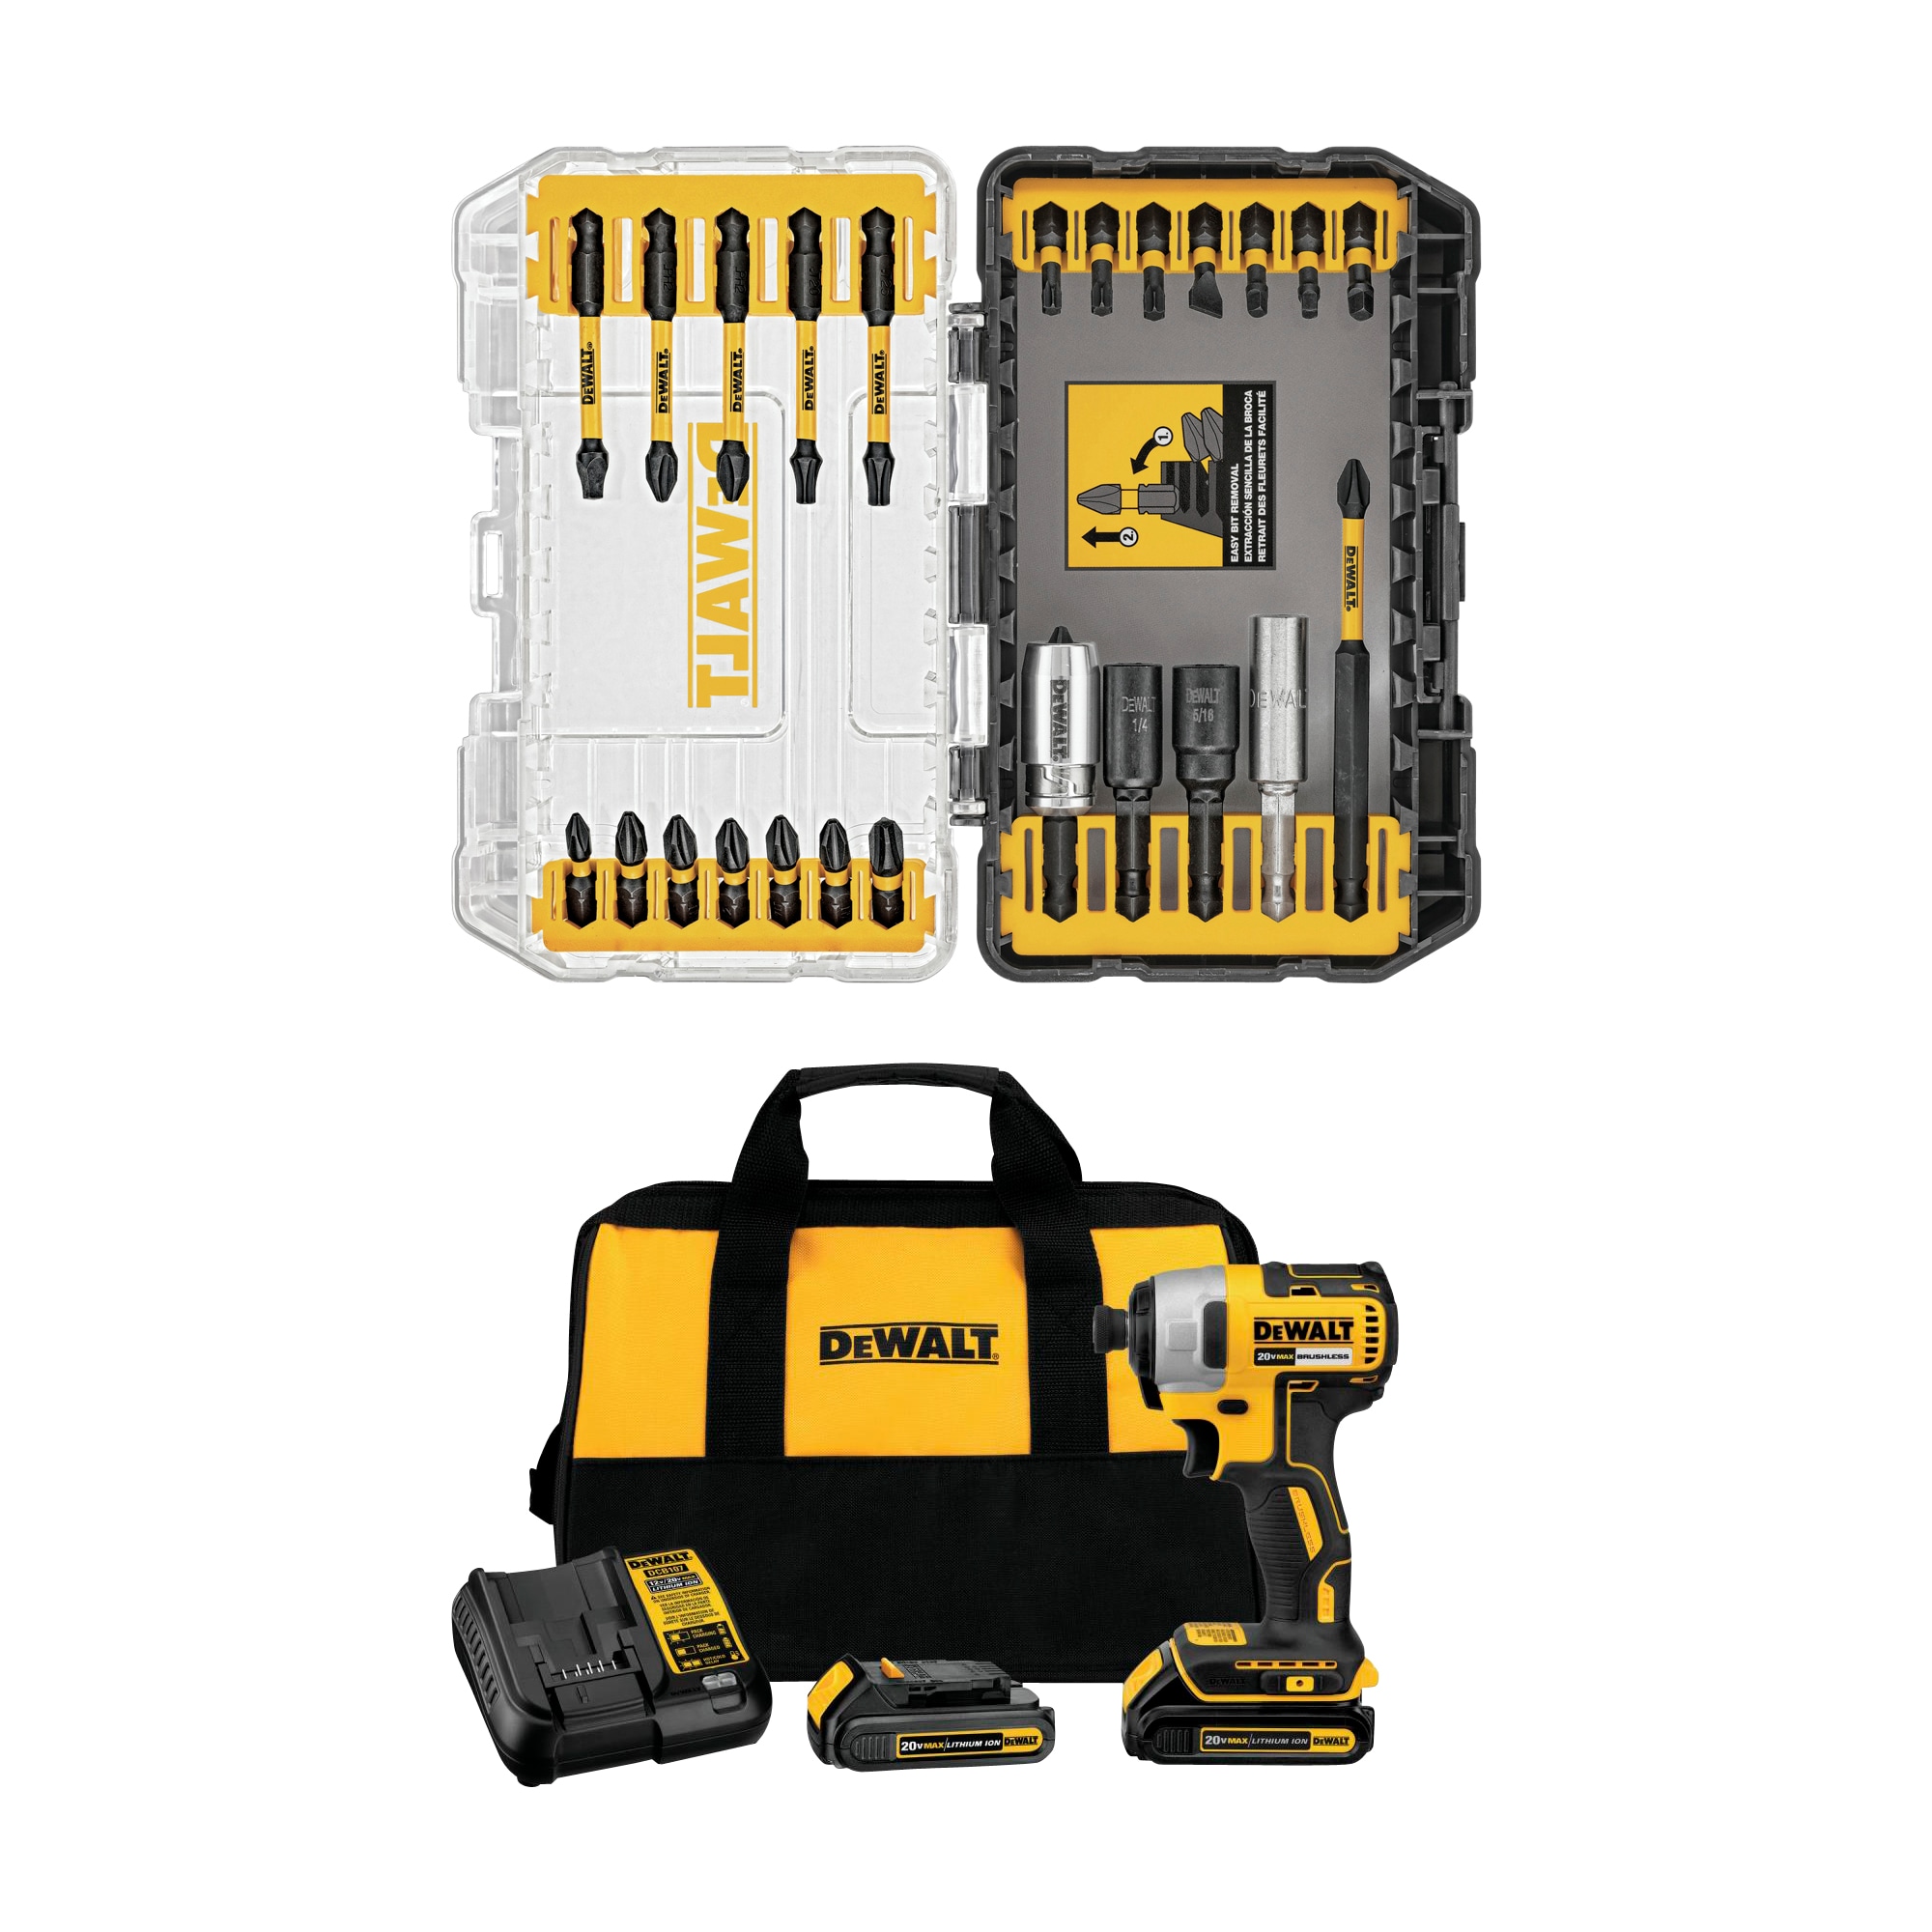 DEWALT 20-volt Max 1/4-in Variable Speed Brushless Cordless Impact Driver (2-Batteries Included) & FlexTorq 25-Piece 1/4-in x Set Impact Driver Bit